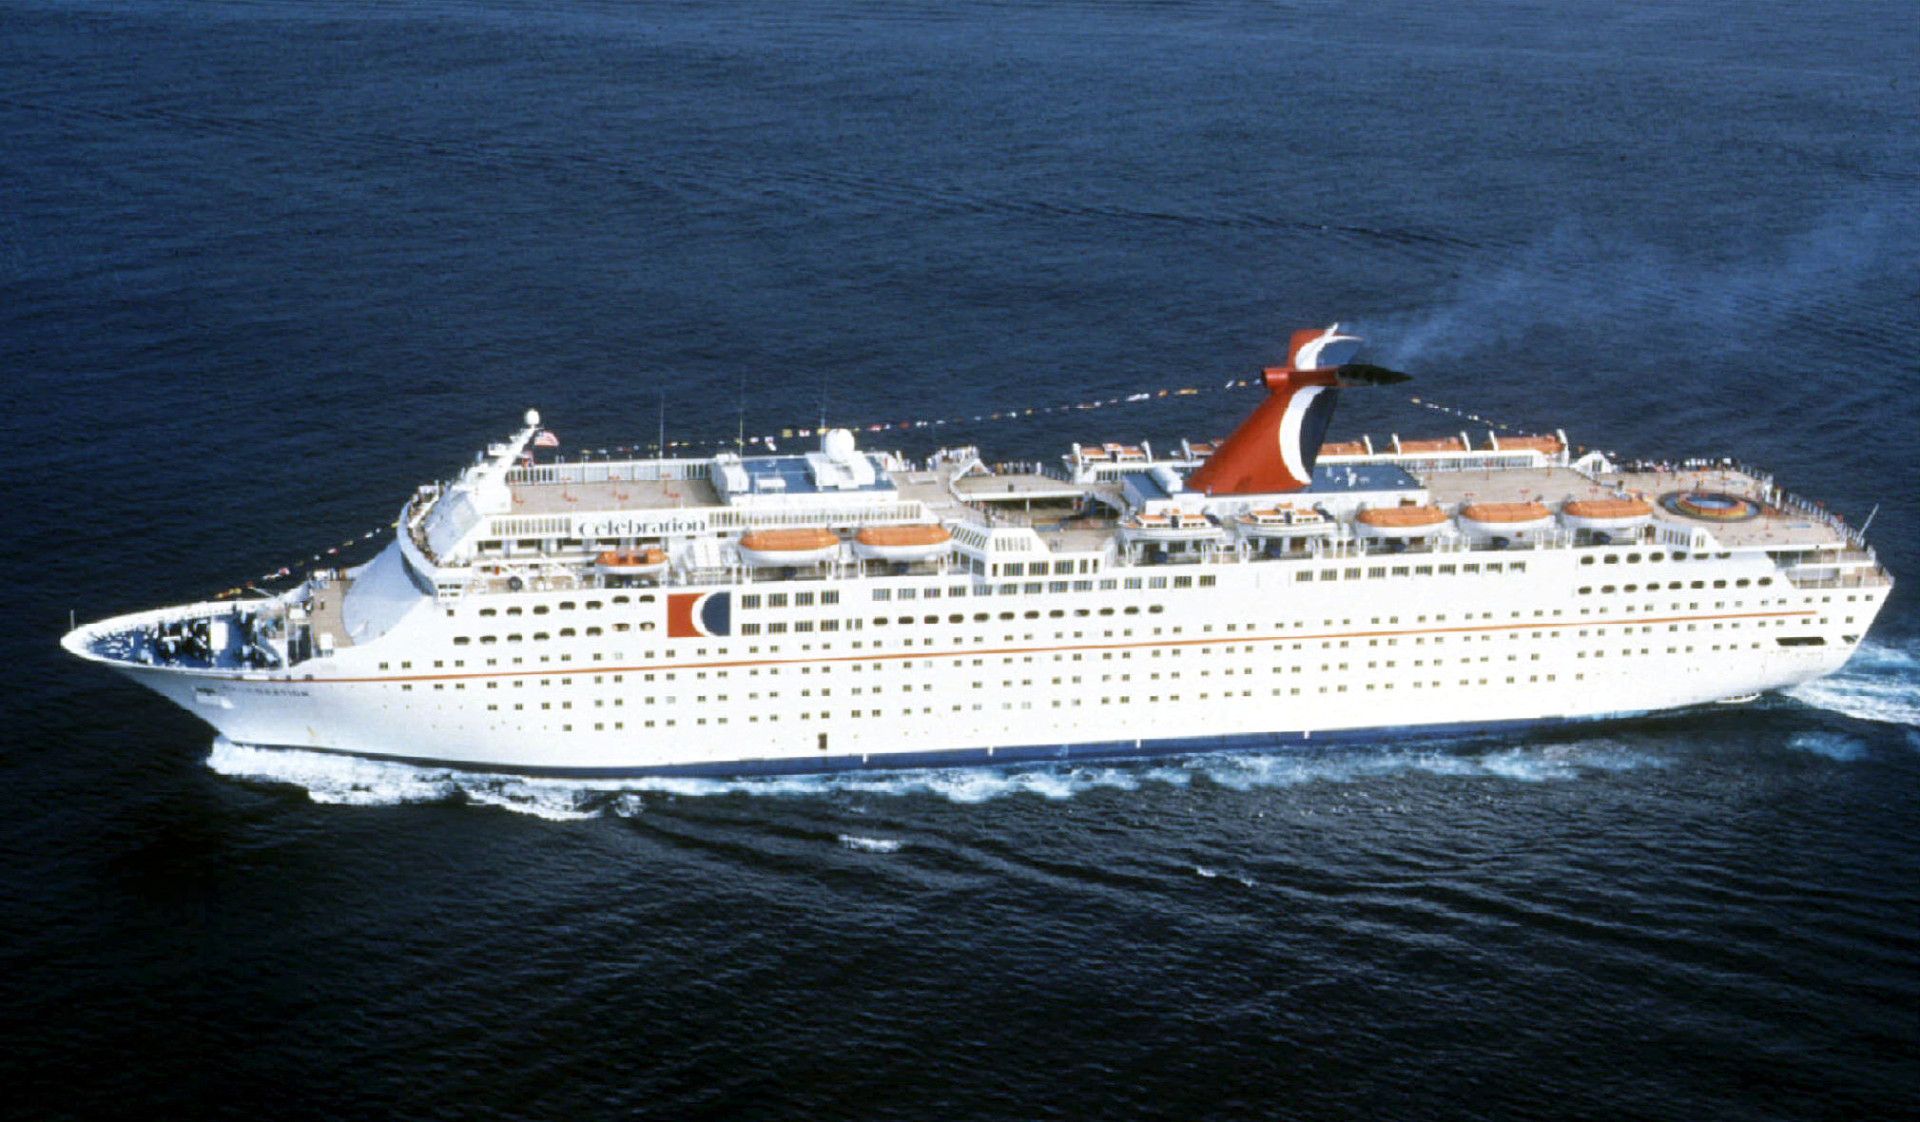 <p>Luke Renner, a 22-year-old passenger with autism on the Carnival Fantasy, is thought to have fallen overboard on December 16, 2018. The Mexican navy initiated a search operation for his whereabouts.</p><p><a href="https://www.msn.com/en-us/community/channel/vid-7xx8mnucu55yw63we9va2gwr7uihbxwc68fxqp25x6tg4ftibpra?cvid=94631541bc0f4f89bfd59158d696ad7e">Follow us and access great exclusive content every day</a></p>